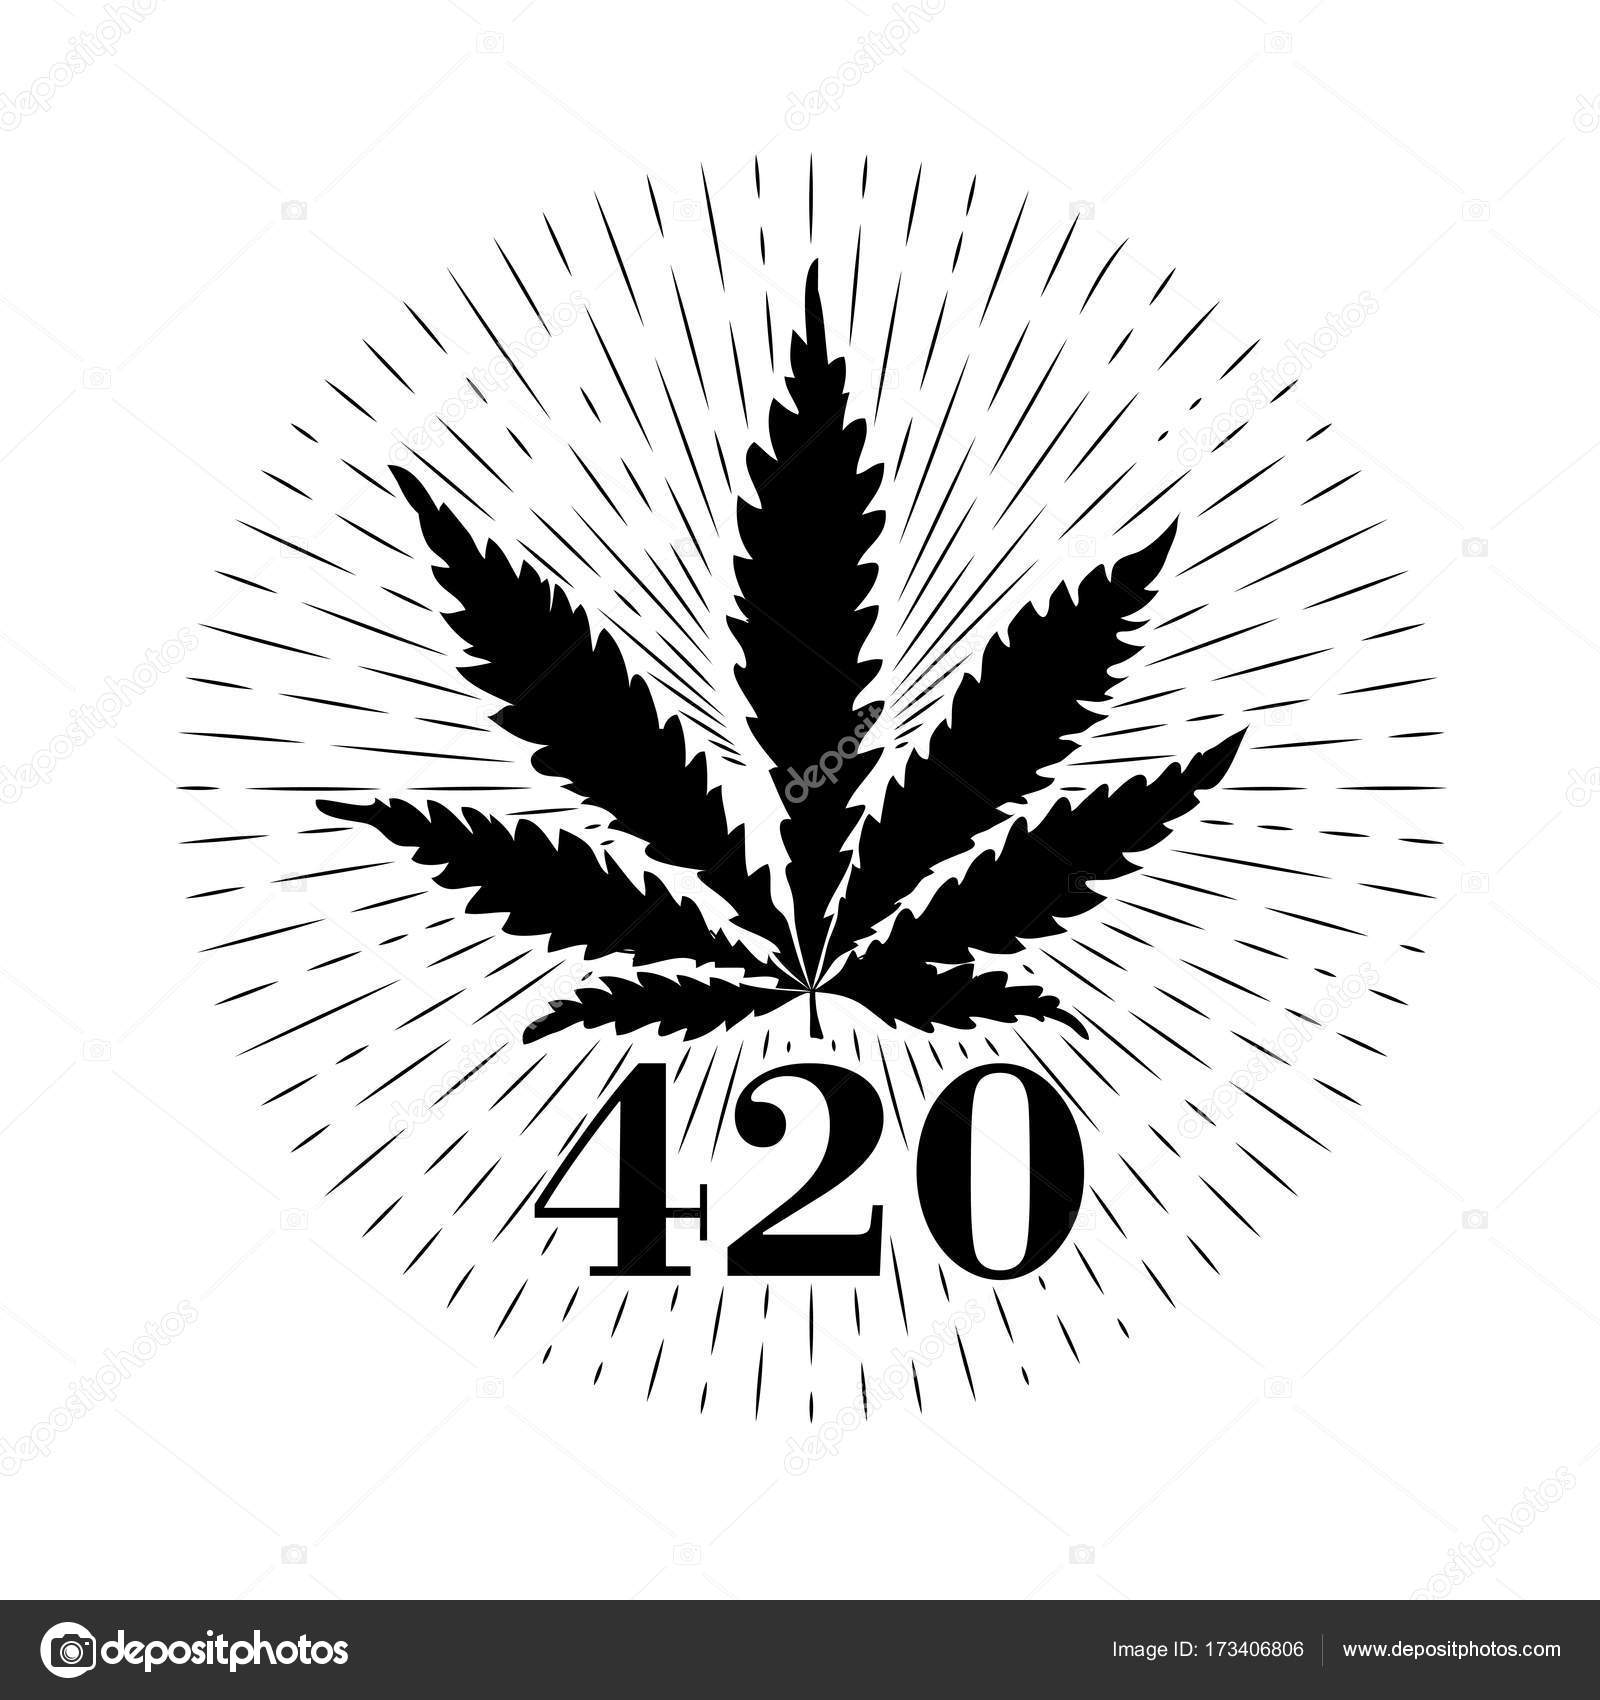 Cannabis 420 Cliparts, Stock Vector and Royalty Free Cannabis 420  Illustrations